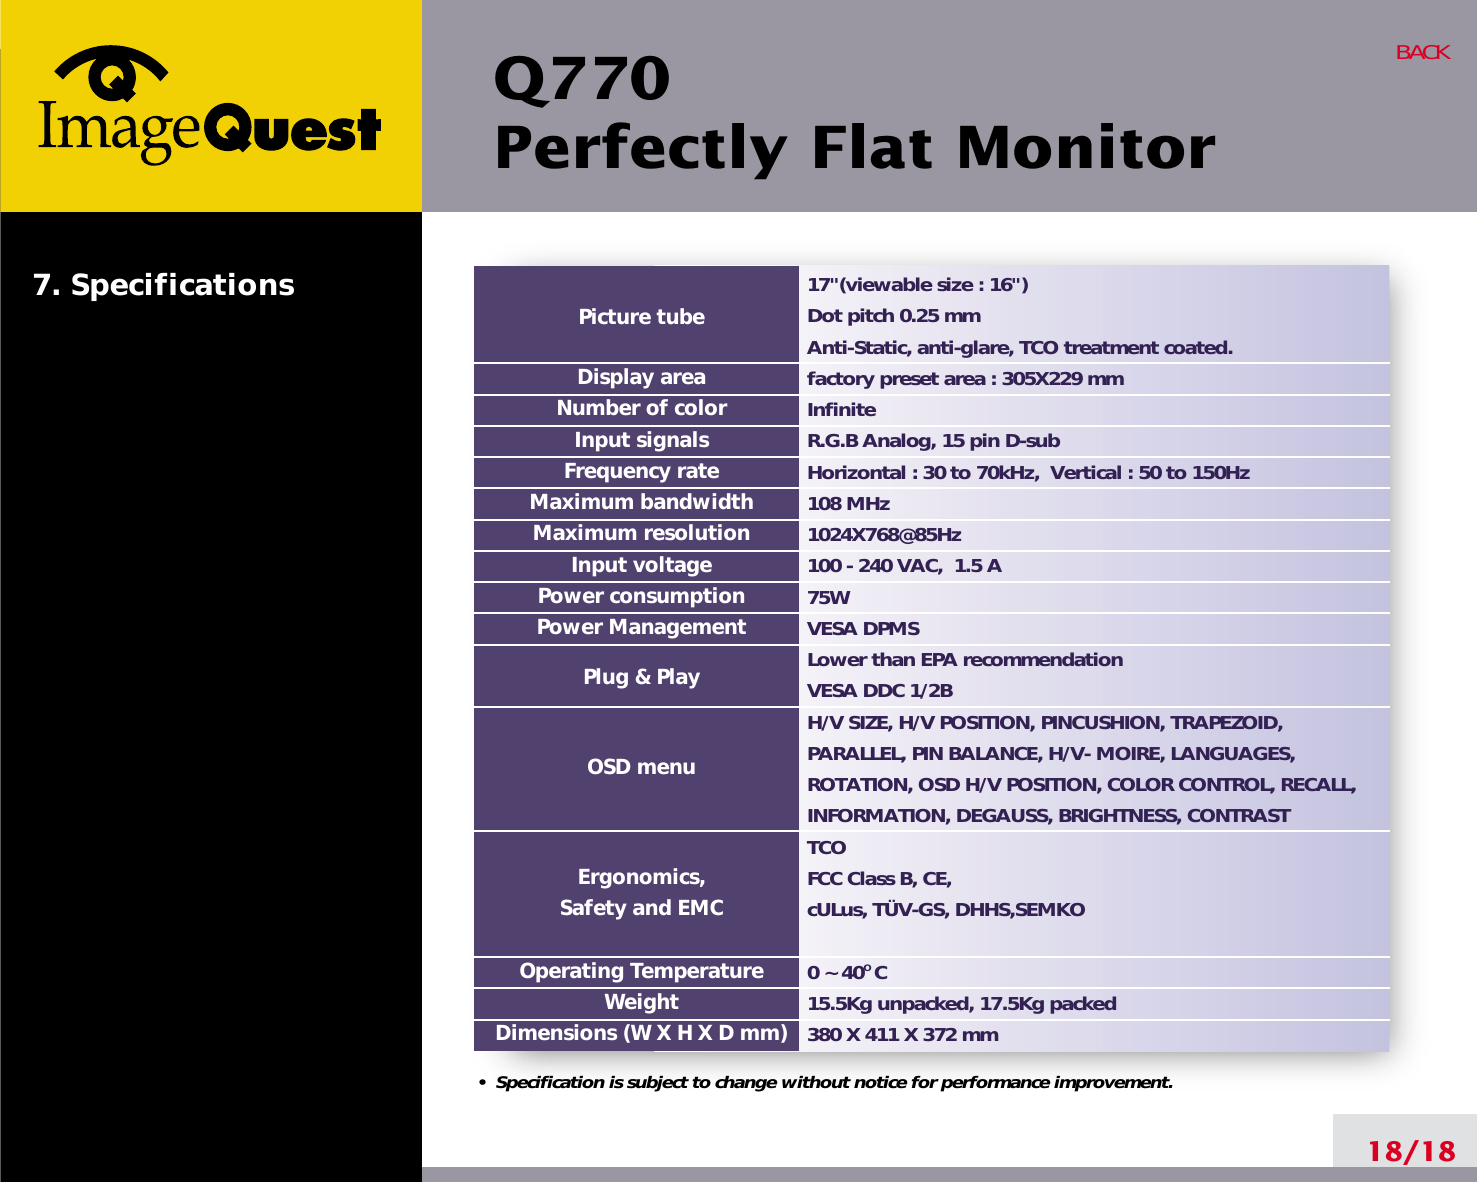 Q770Perfectly Flat Monitor18/18BACK17&quot;(viewable size : 16&quot;)Dot pitch 0.25 mmAnti-Static, anti-glare, TCO treatment coated.factory preset area : 305X229 mm InfiniteR.G.B Analog, 15 pin D-subHorizontal : 30 to 70kHz,  Vertical : 50 to 150Hz108 MHz1024X768@85Hz100 - 240 VAC,  1.5 A75W  VESA DPMSLower than EPA recommendationVESA DDC 1/2BH/V SIZE, H/V POSITION, PINCUSHION, TRAPEZOID,PARALLEL, PIN BALANCE, H/V- MOIRE, LANGUAGES,ROTATION, OSD H/V POSITION, COLOR CONTROL, RECALL,INFORMATION, DEGAUSS, BRIGHTNESS, CONTRASTTCOFCC Class B, CE, cULus, TÜV-GS, DHHS,SEMKO 0 ~ 40O C15.5Kg unpacked, 17.5Kg packed380 X 411 X 372 mmPicture tubeDisplay areaNumber of colorInput signalsFrequency rateMaximum bandwidthMaximum resolutionInput voltagePower consumptionPower ManagementPlug &amp; PlayOSD menuErgonomics,Safety and EMCOperating TemperatureWeightDimensions (W X H X D mm)•  Specification is subject to change without notice for performance improvement.7. Specifications